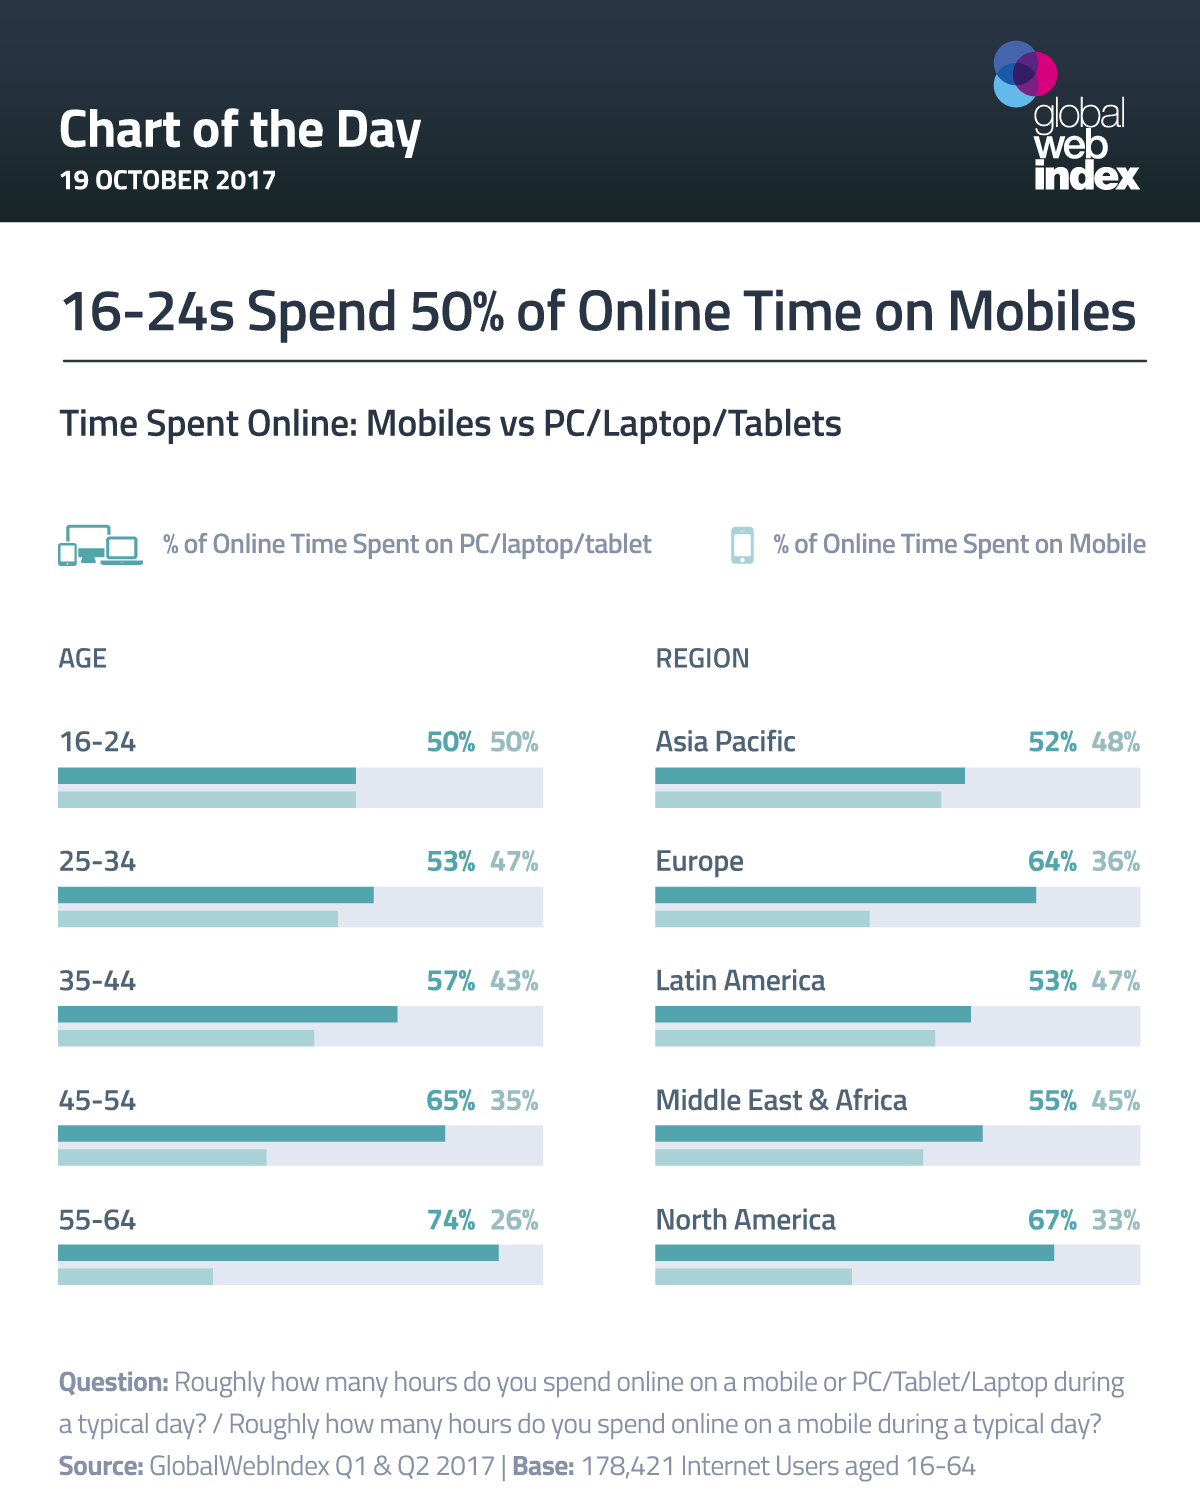 16-24s Spend 50% of Online Time on Mobiles